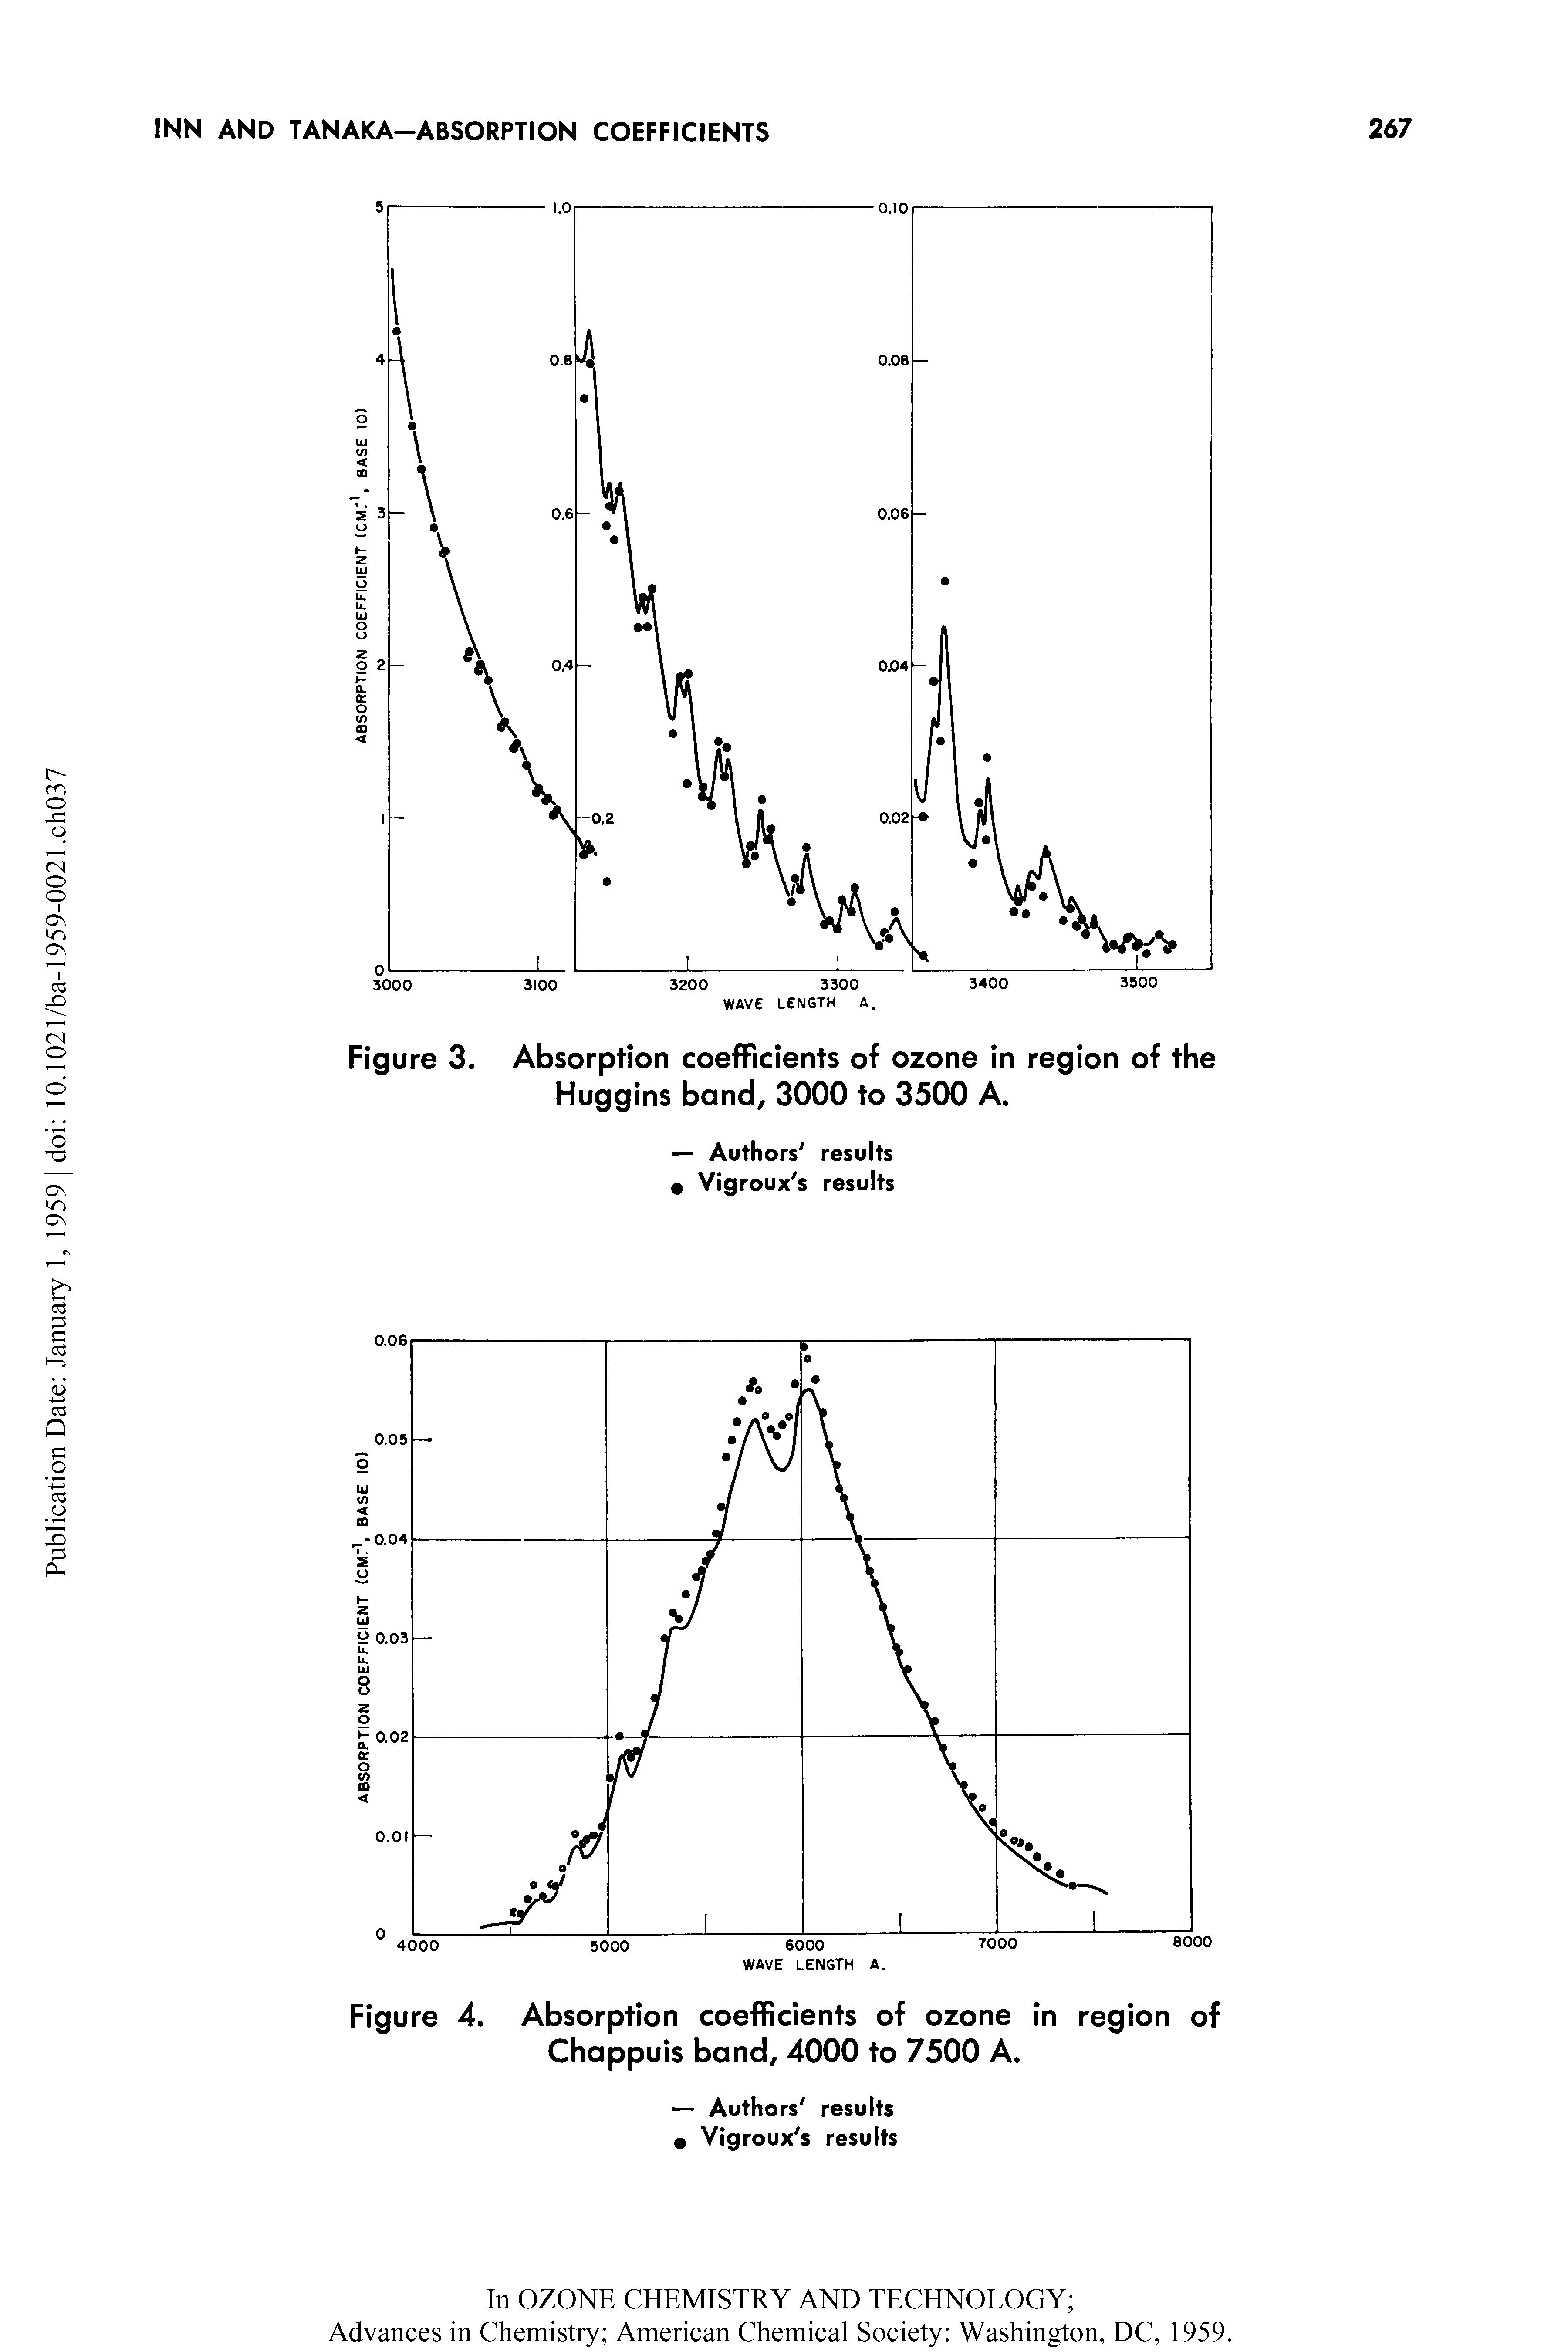 Figure 3. Absorption coefficients of ozone in region of the Huggins band, 3000 to 3500 A.